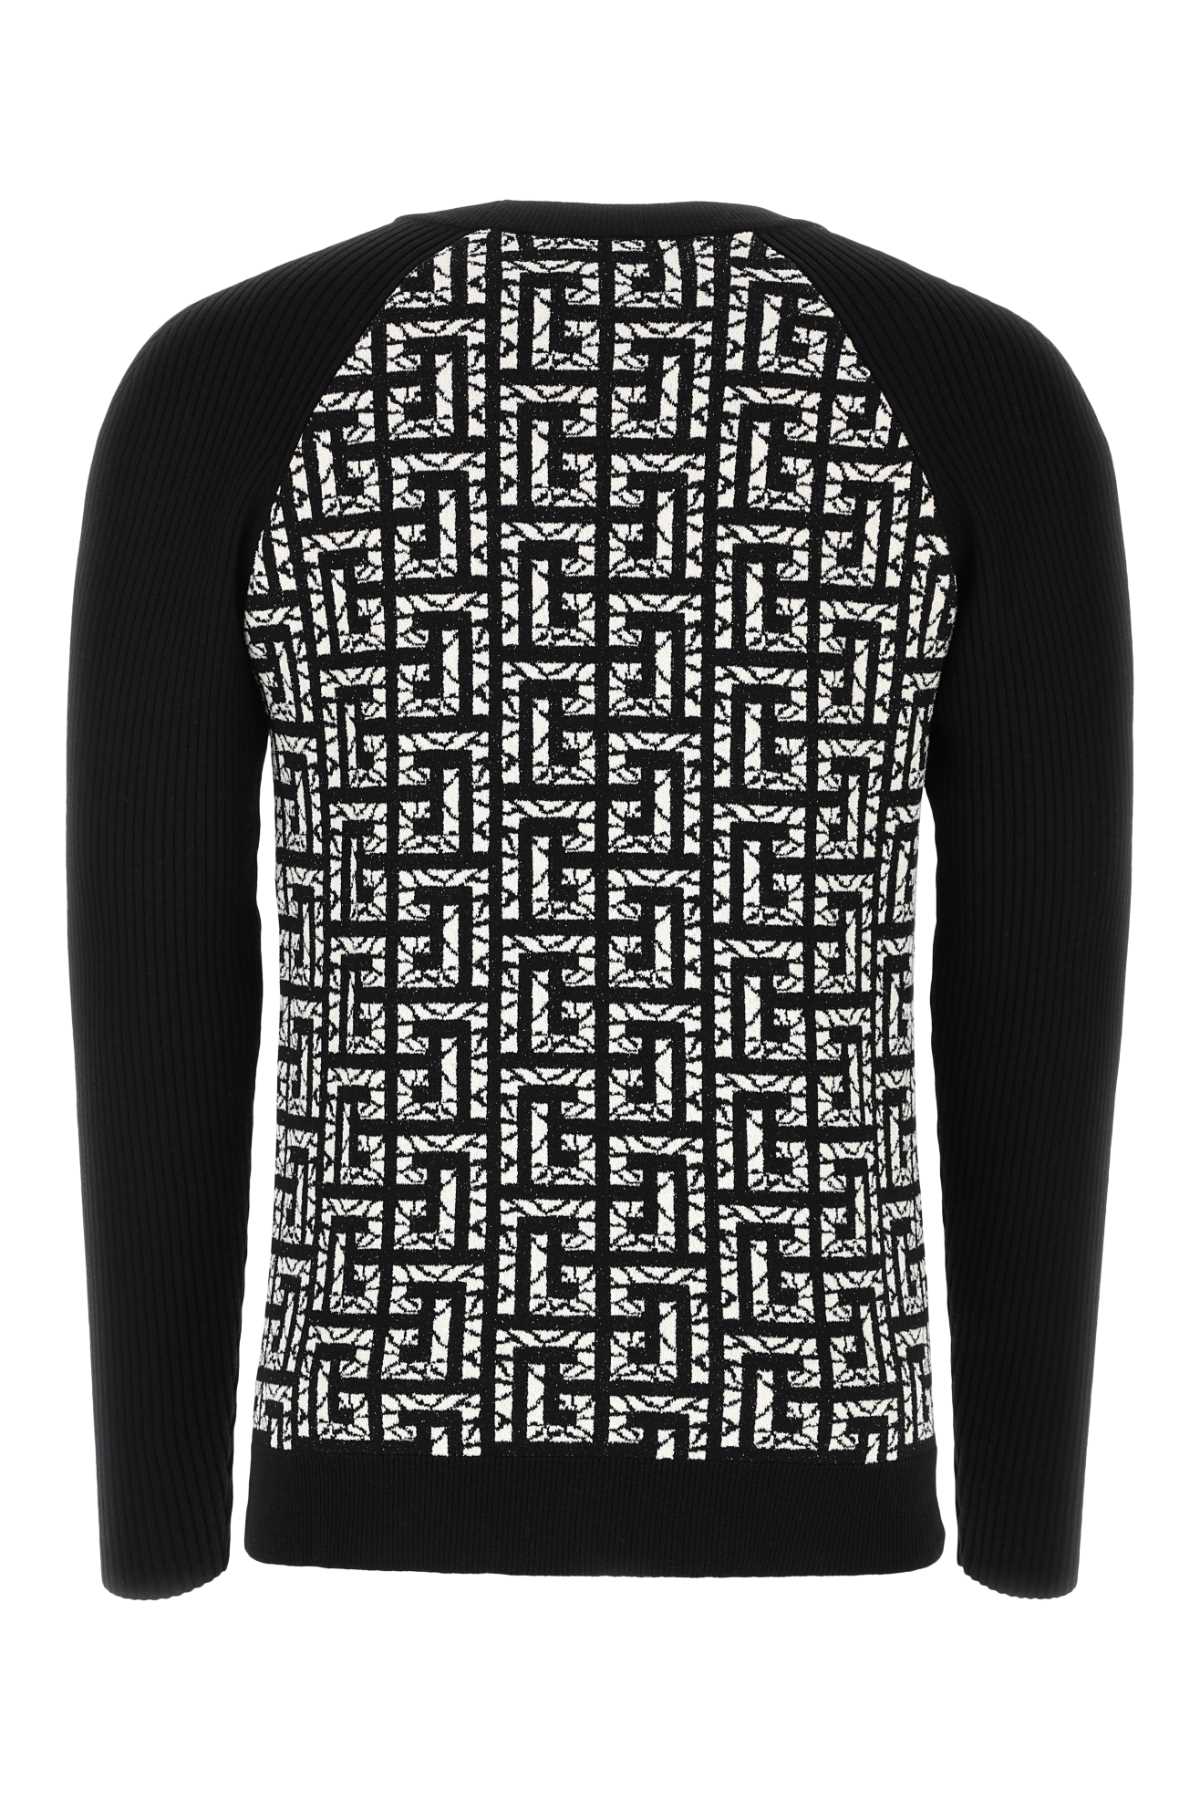 Balmain Embroidered Wool Blend Sweater In Eer